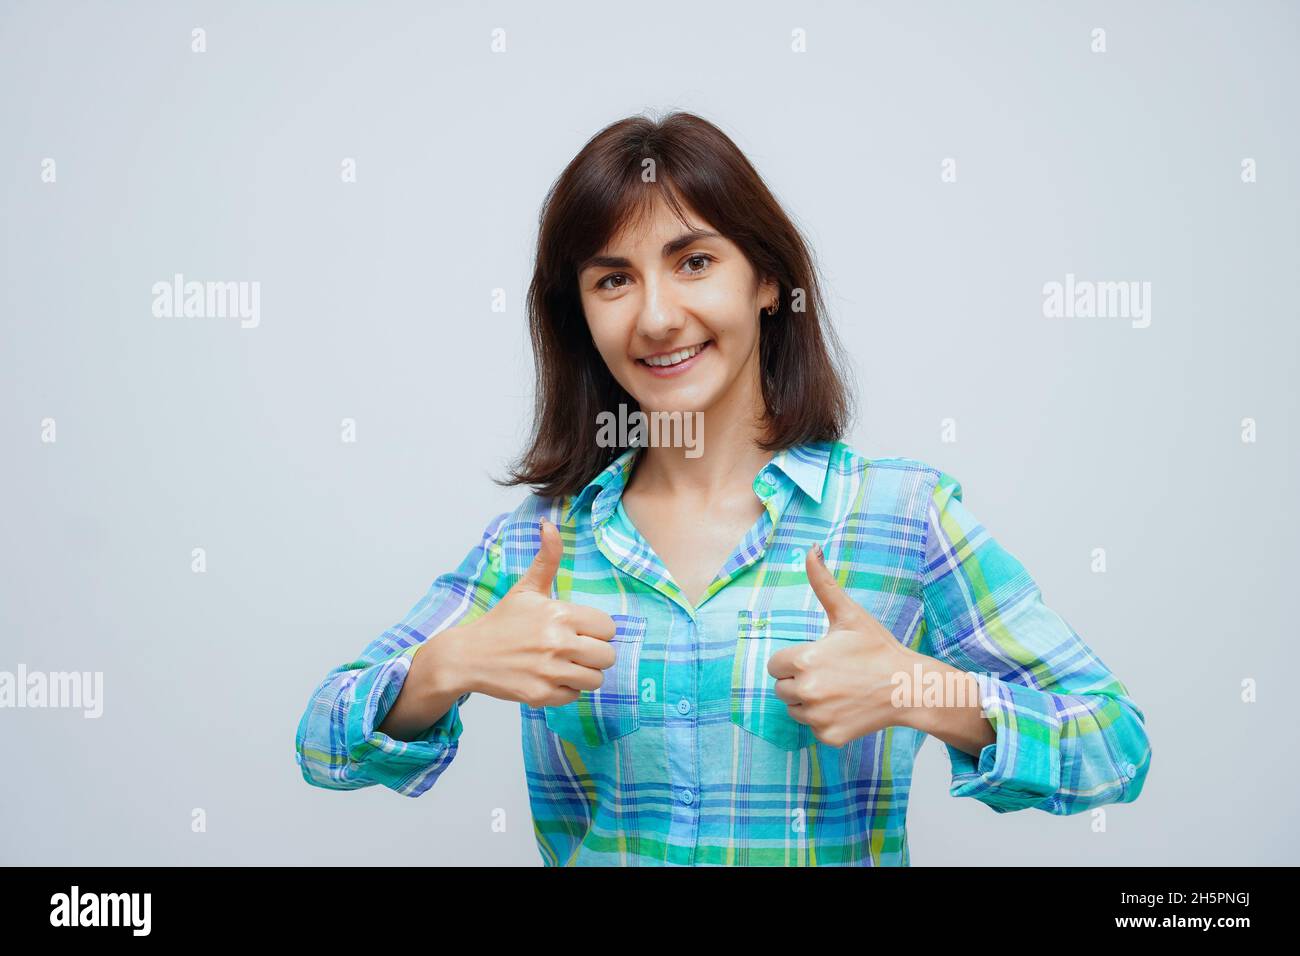 Young caucasian woman success sign doing positive gesture, thumbs up. Isolated on gray background Stock Photo